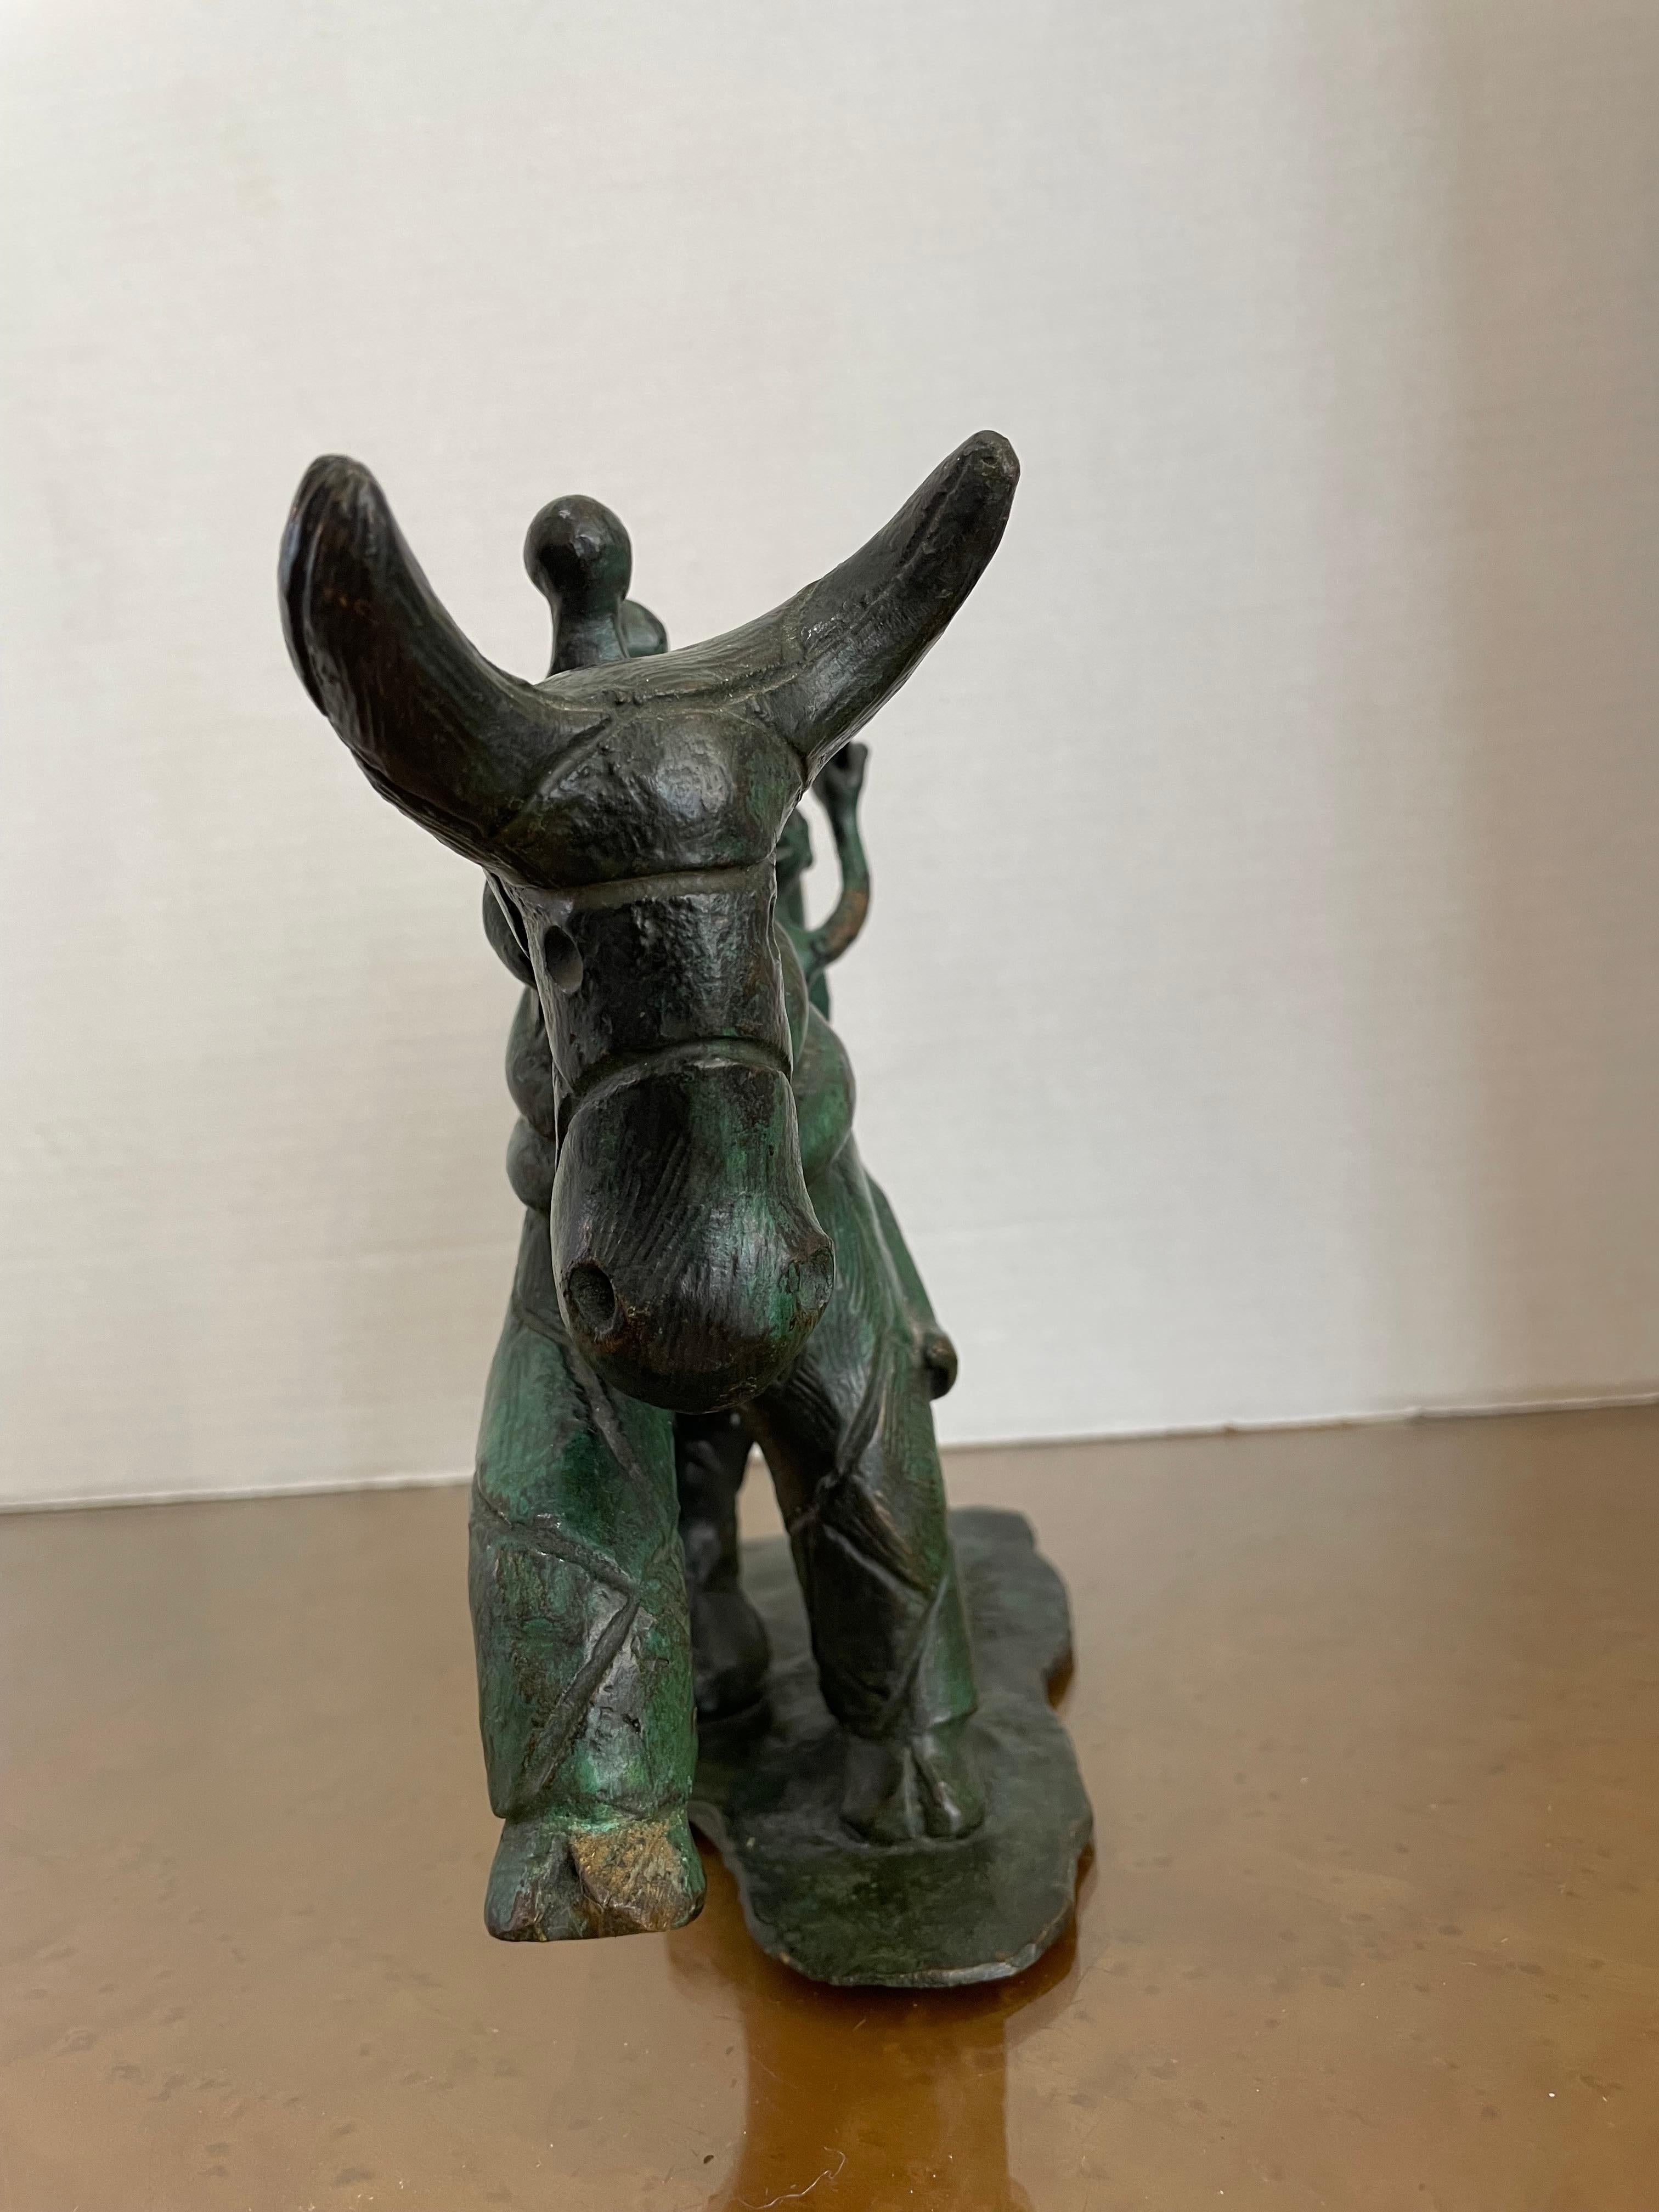 Allegorical Bronze Sculpture of an Angel on Horseback In Good Condition For Sale In West Palm Beach, FL